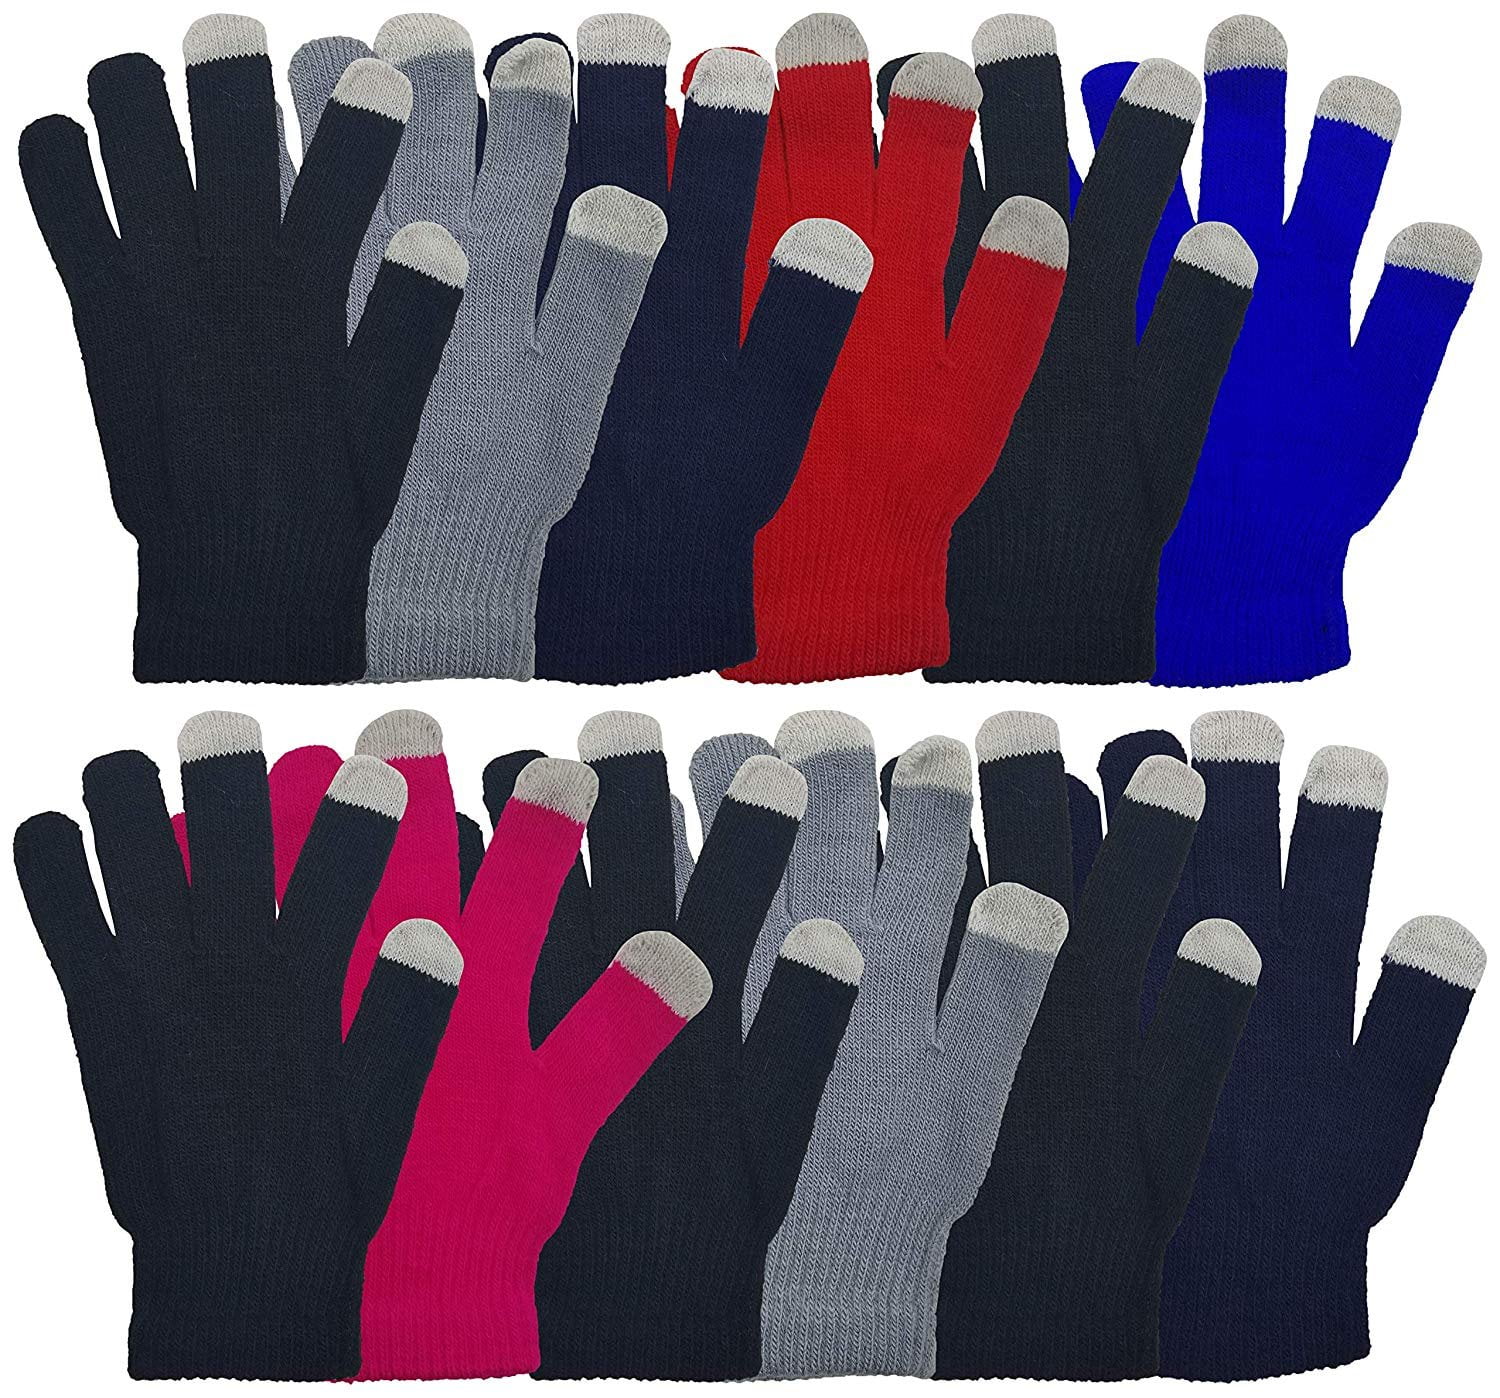 MEN'S LADIES BOYS GIRLS THERMAL  2 IN 1 TOUCH CREEN MAGIC STRETCH  WINTER GLOVE 